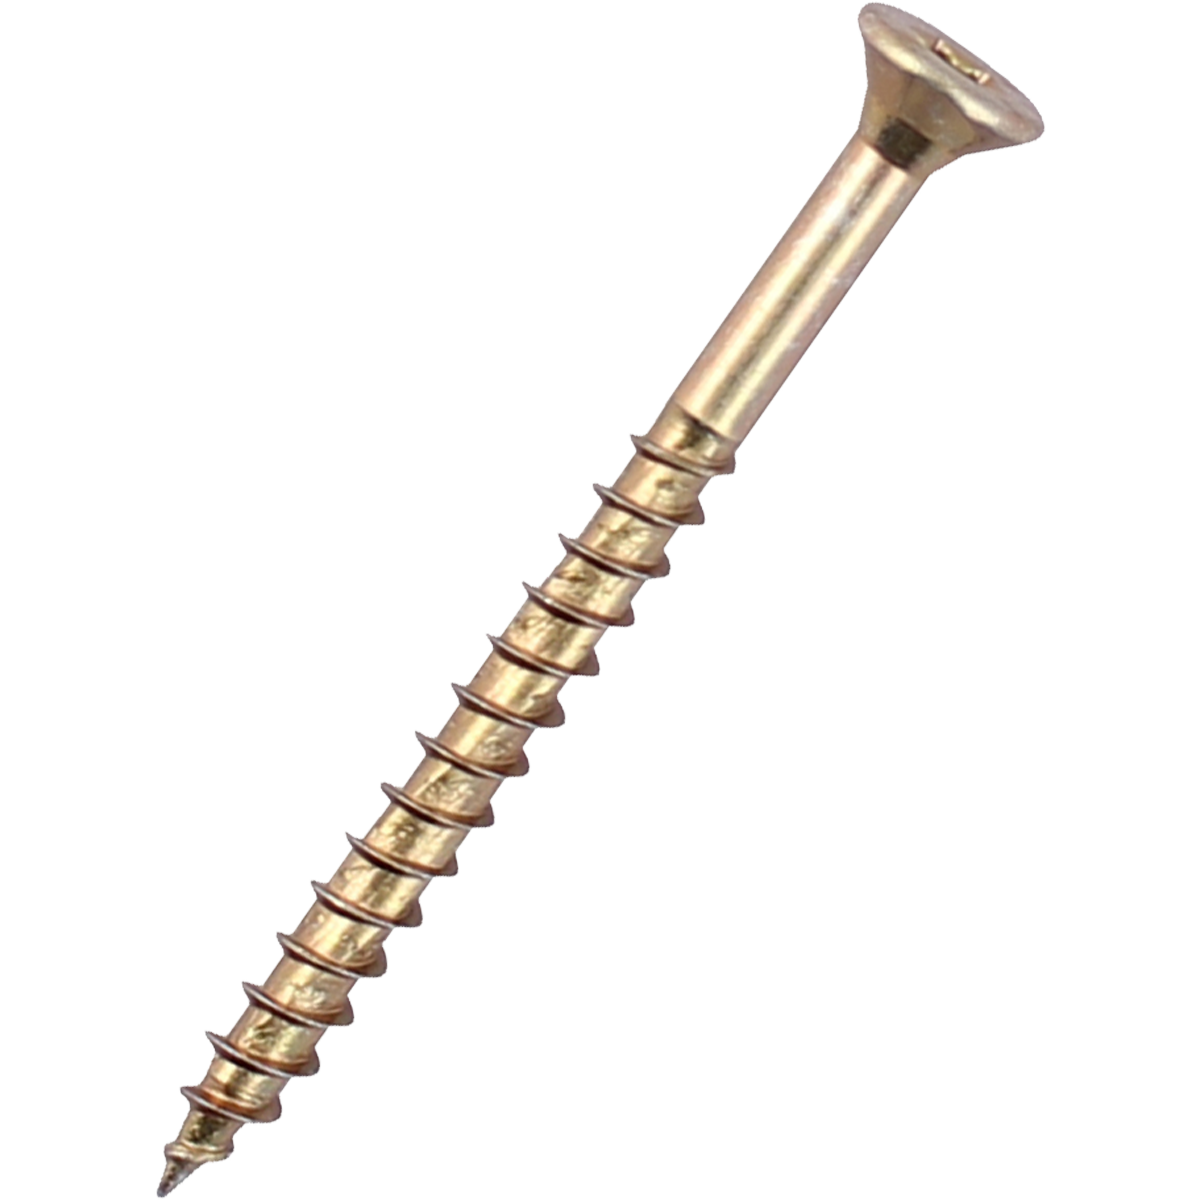 Timco Velocity woodscrews available in various diameters and lengths at great prices.